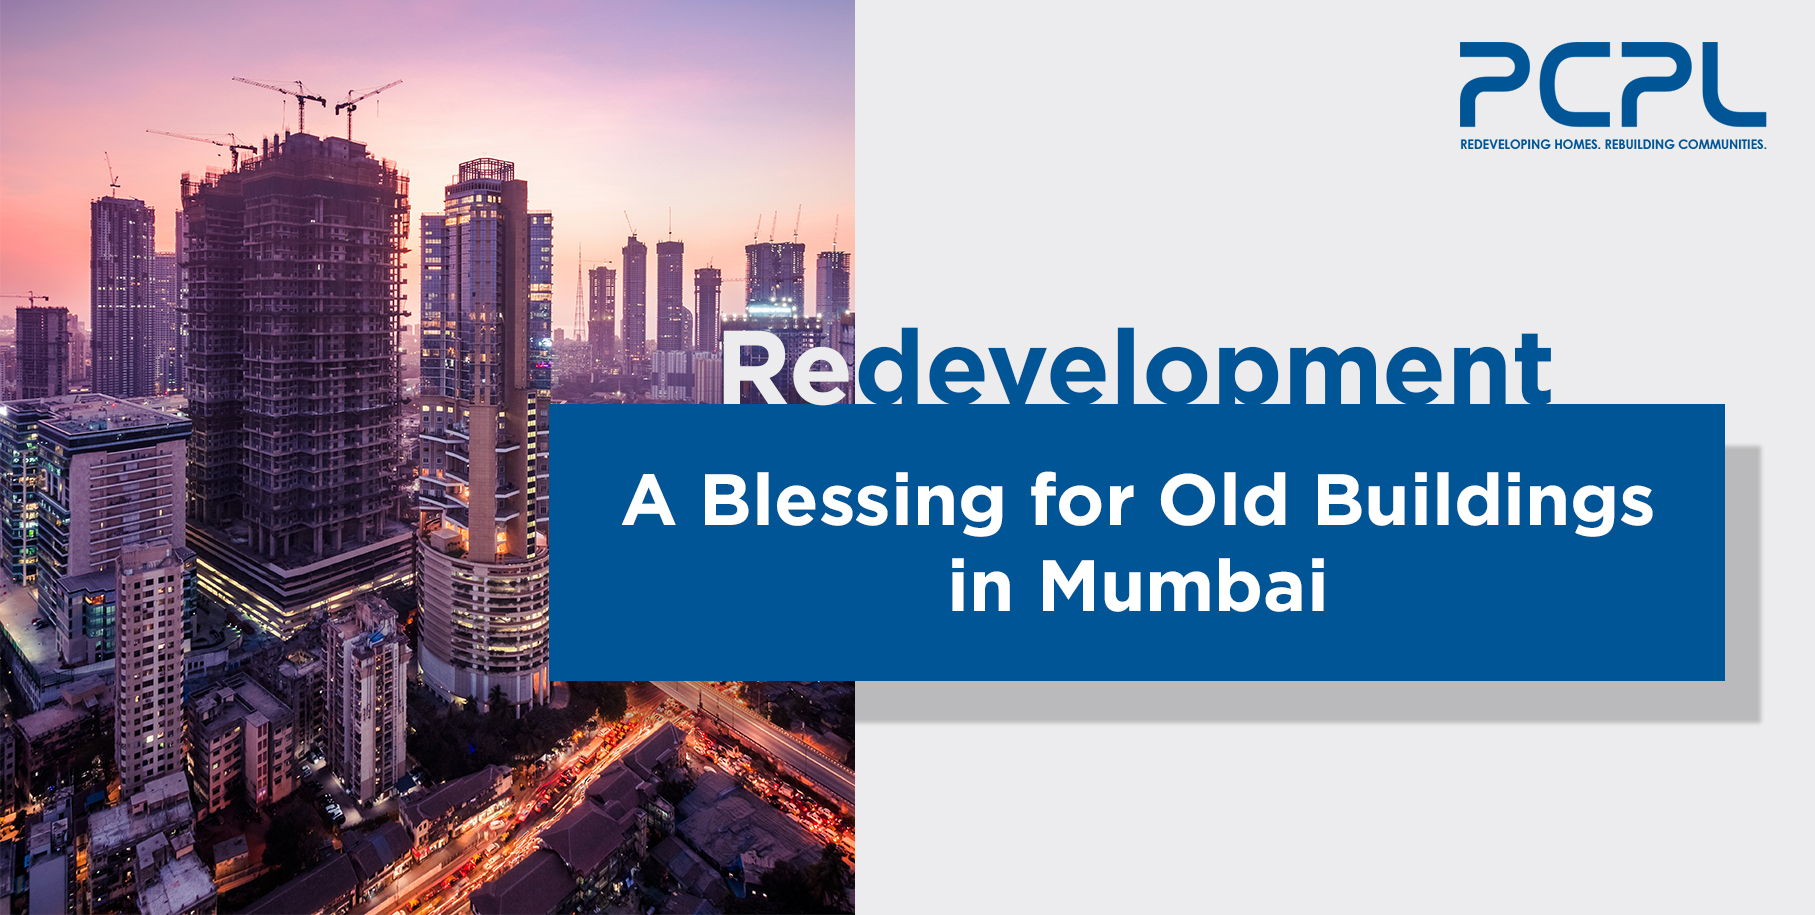 Redevelopment: A Blessing for Old Buildings in Mumbai